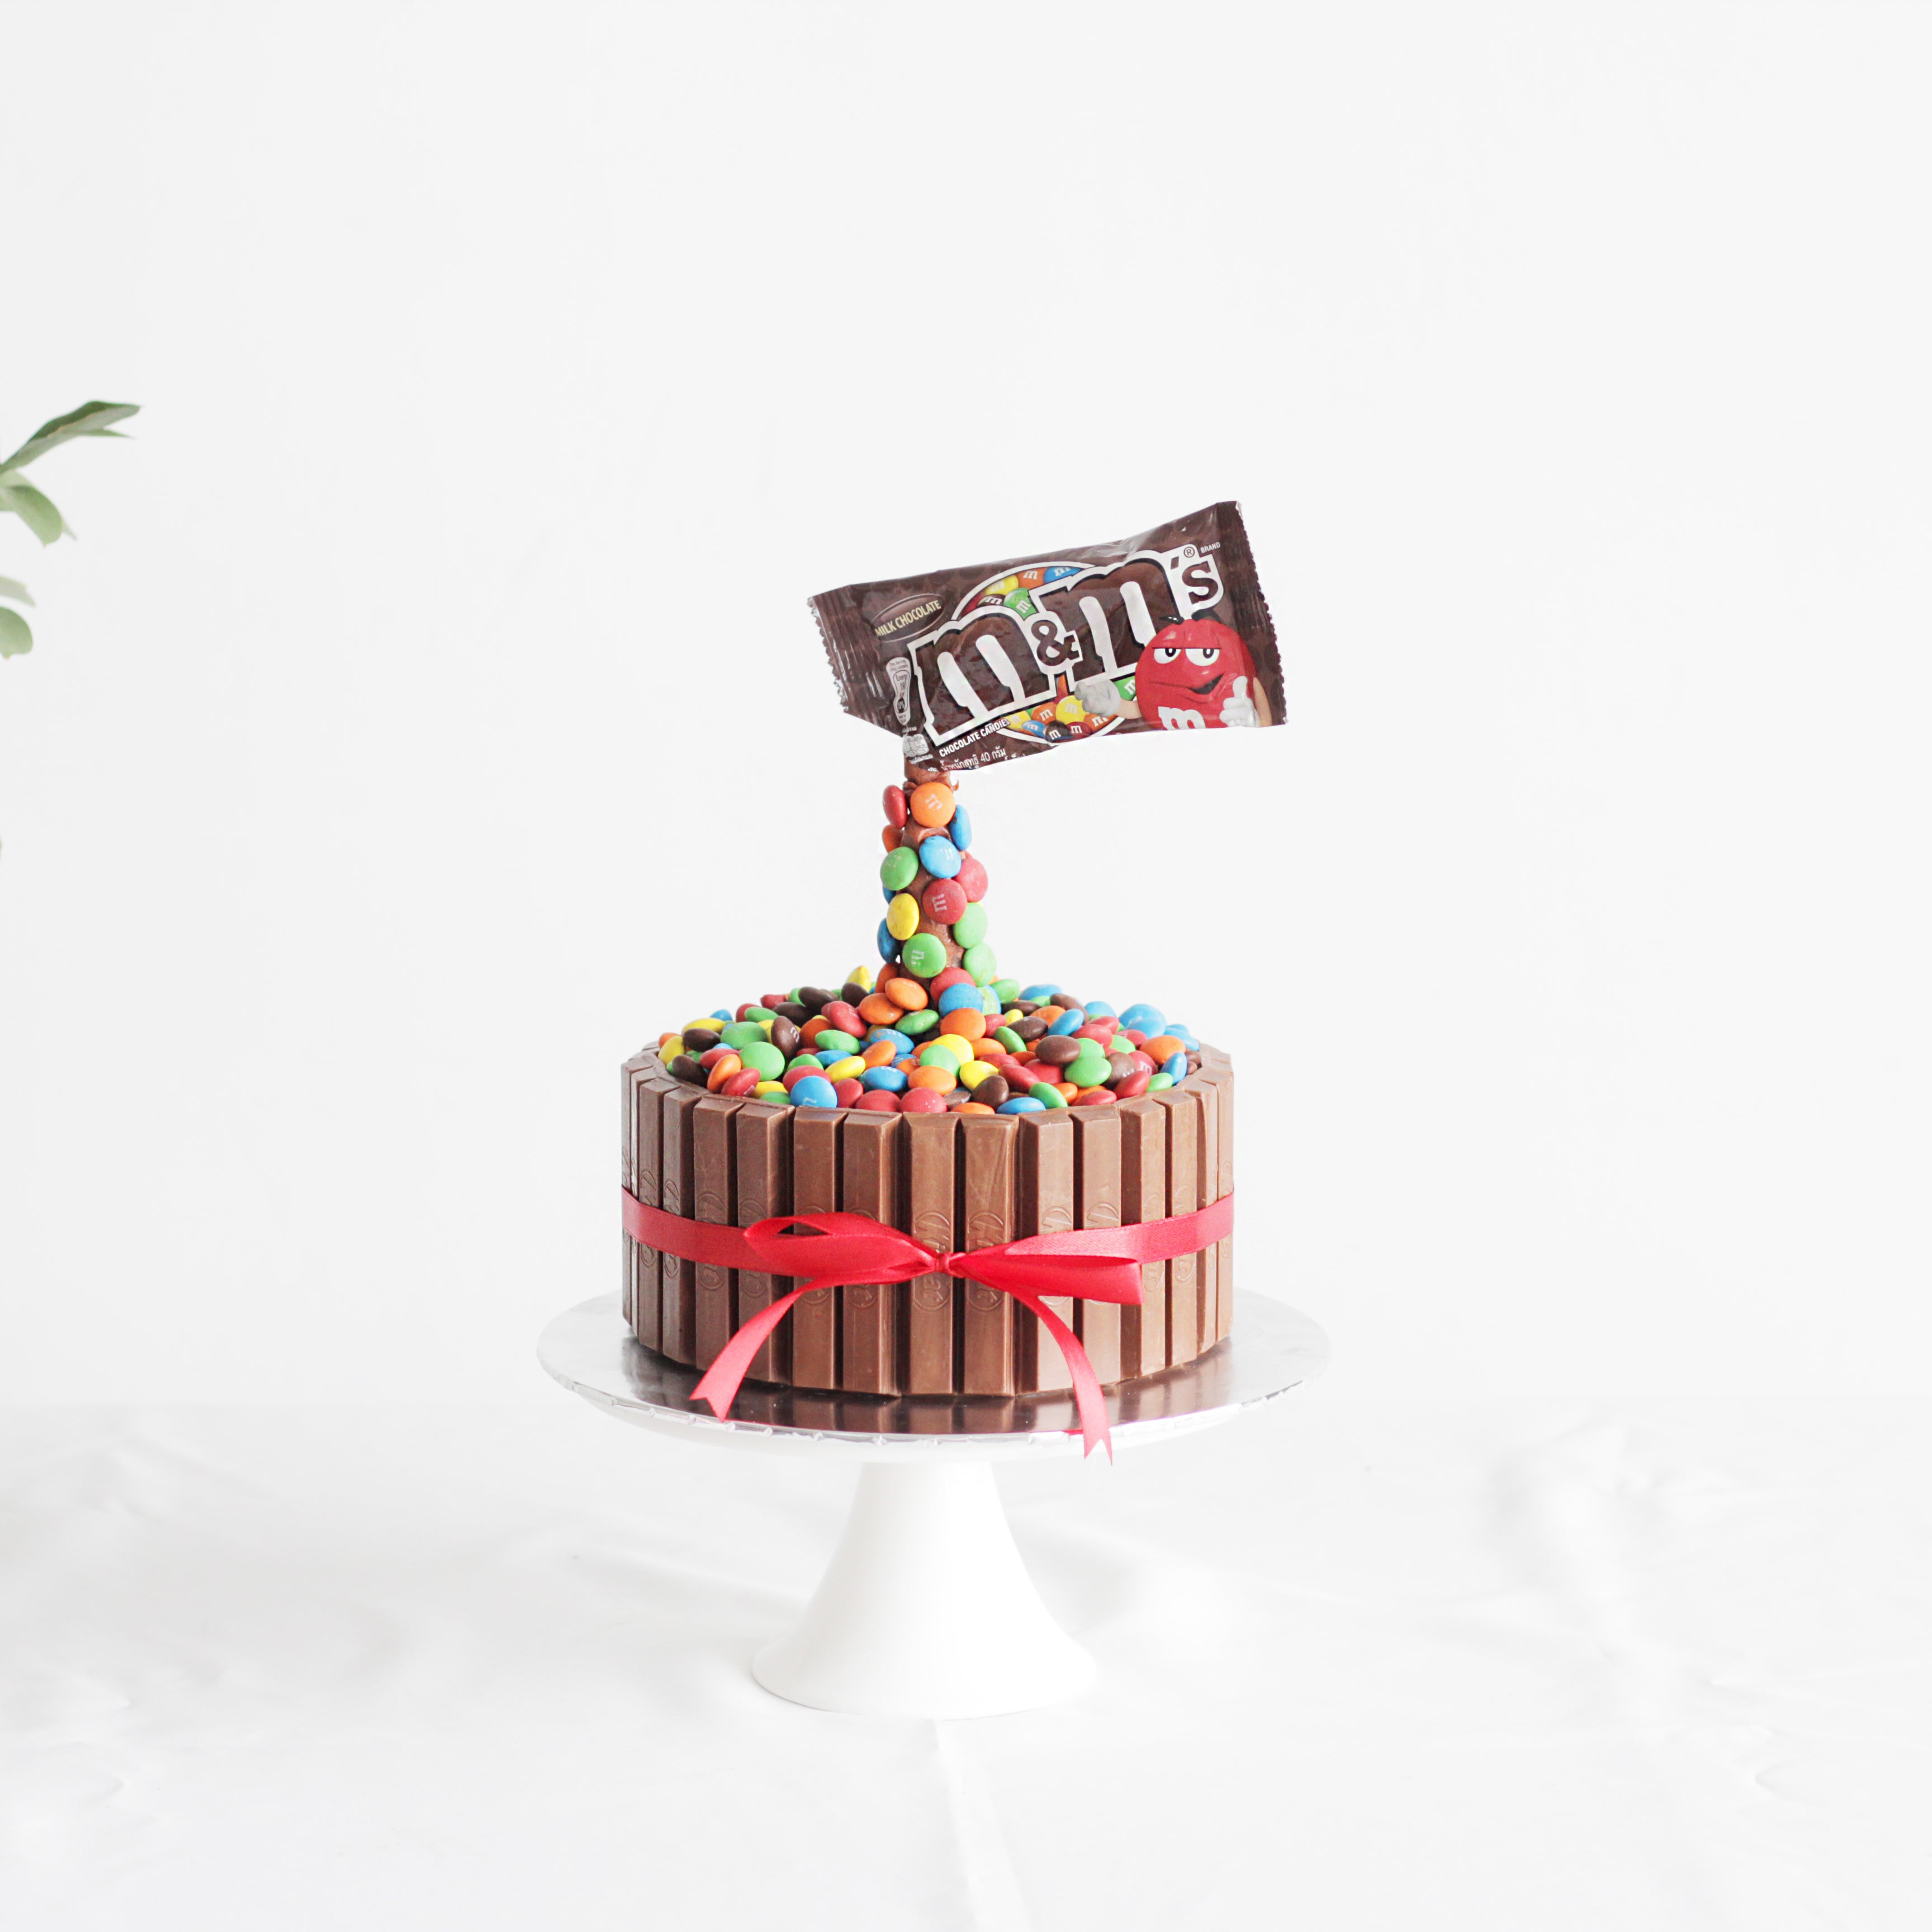 Tiers and Spheres Cake Frame Kit – The Kek Shop